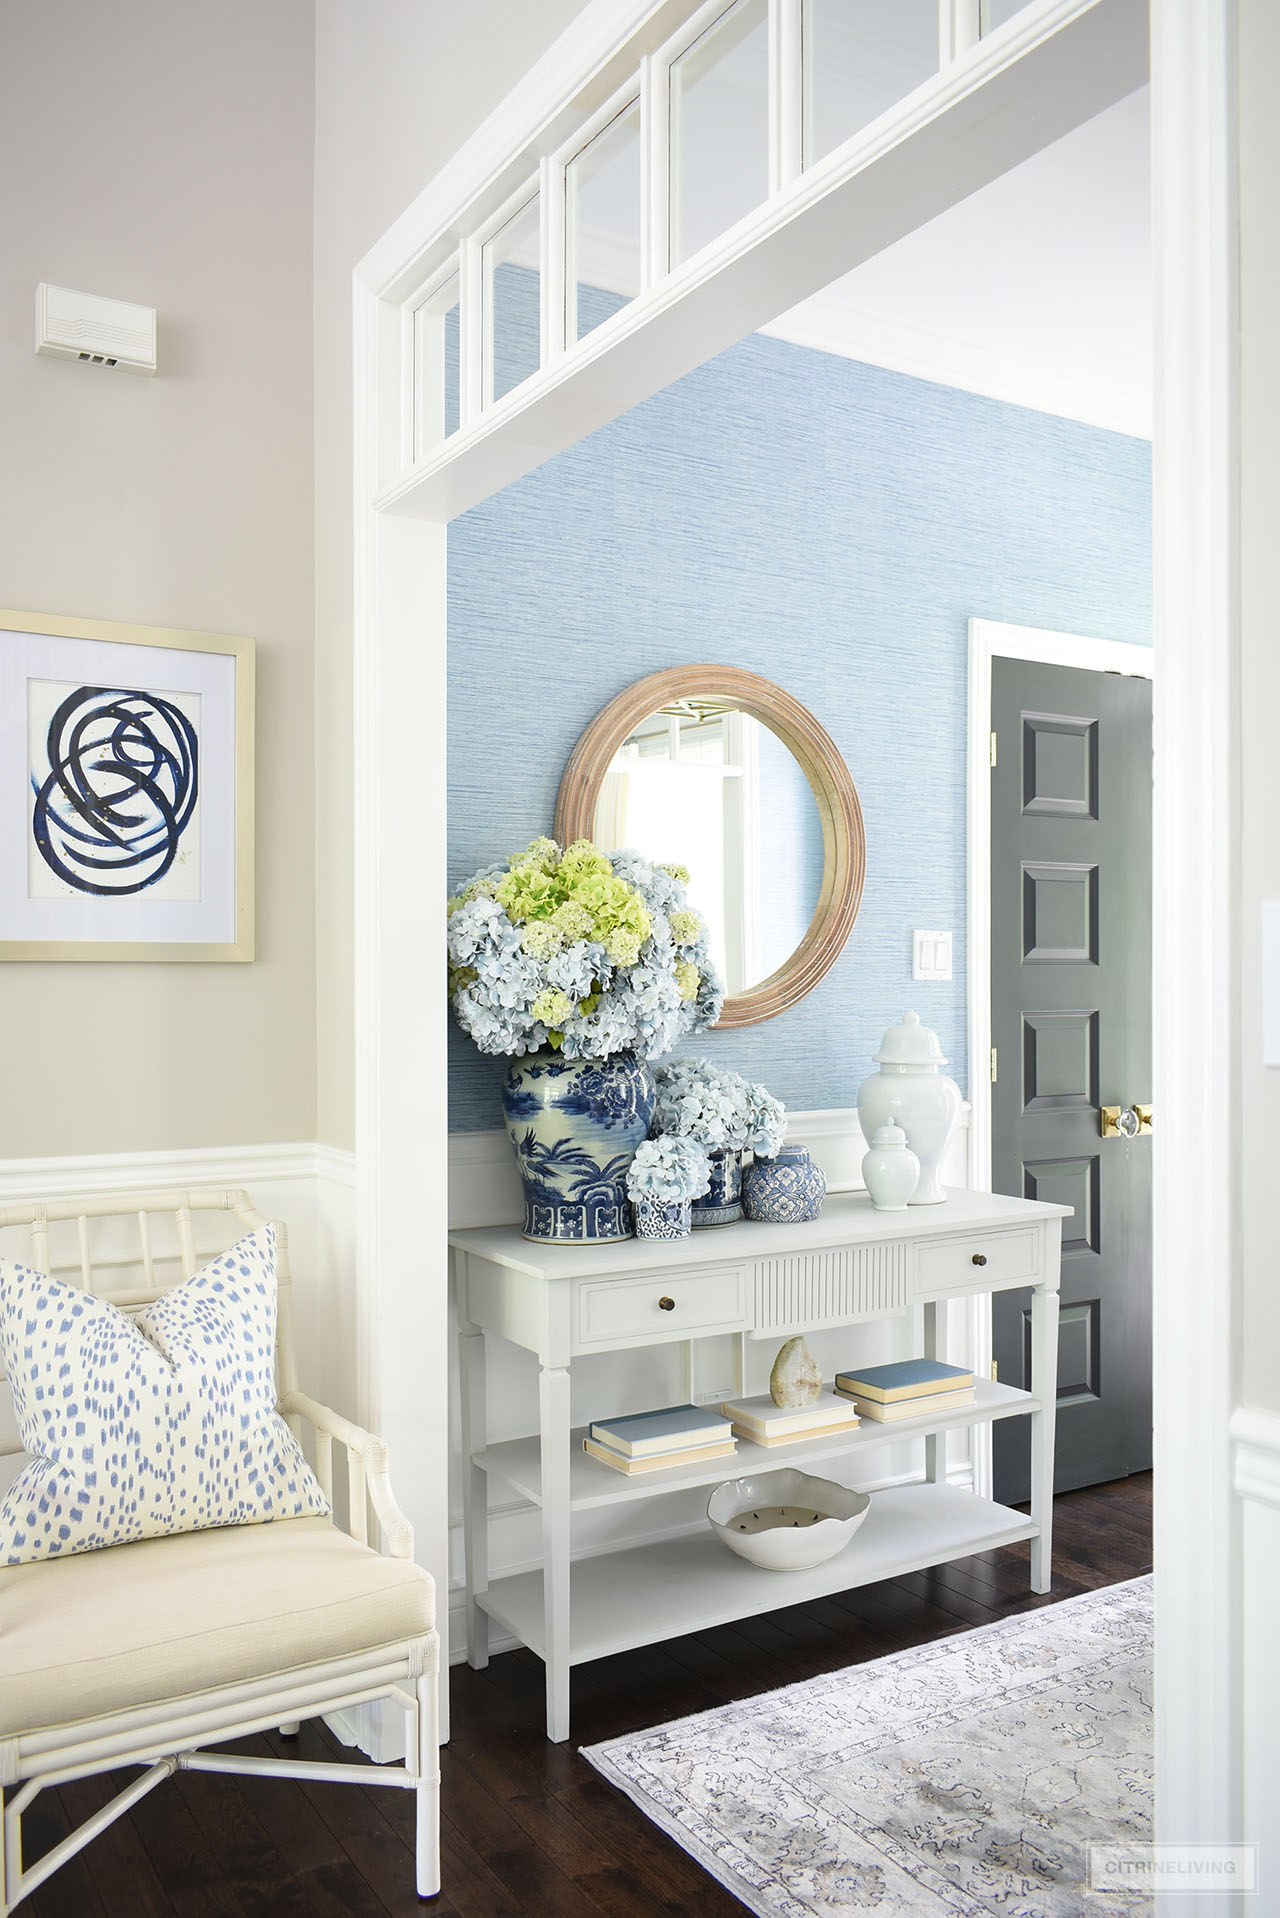 A look into a classic entryway decorated for summer with blue and white ginger jars arranged with beautiful blue and green hydrangeas, accented with simple accessories.